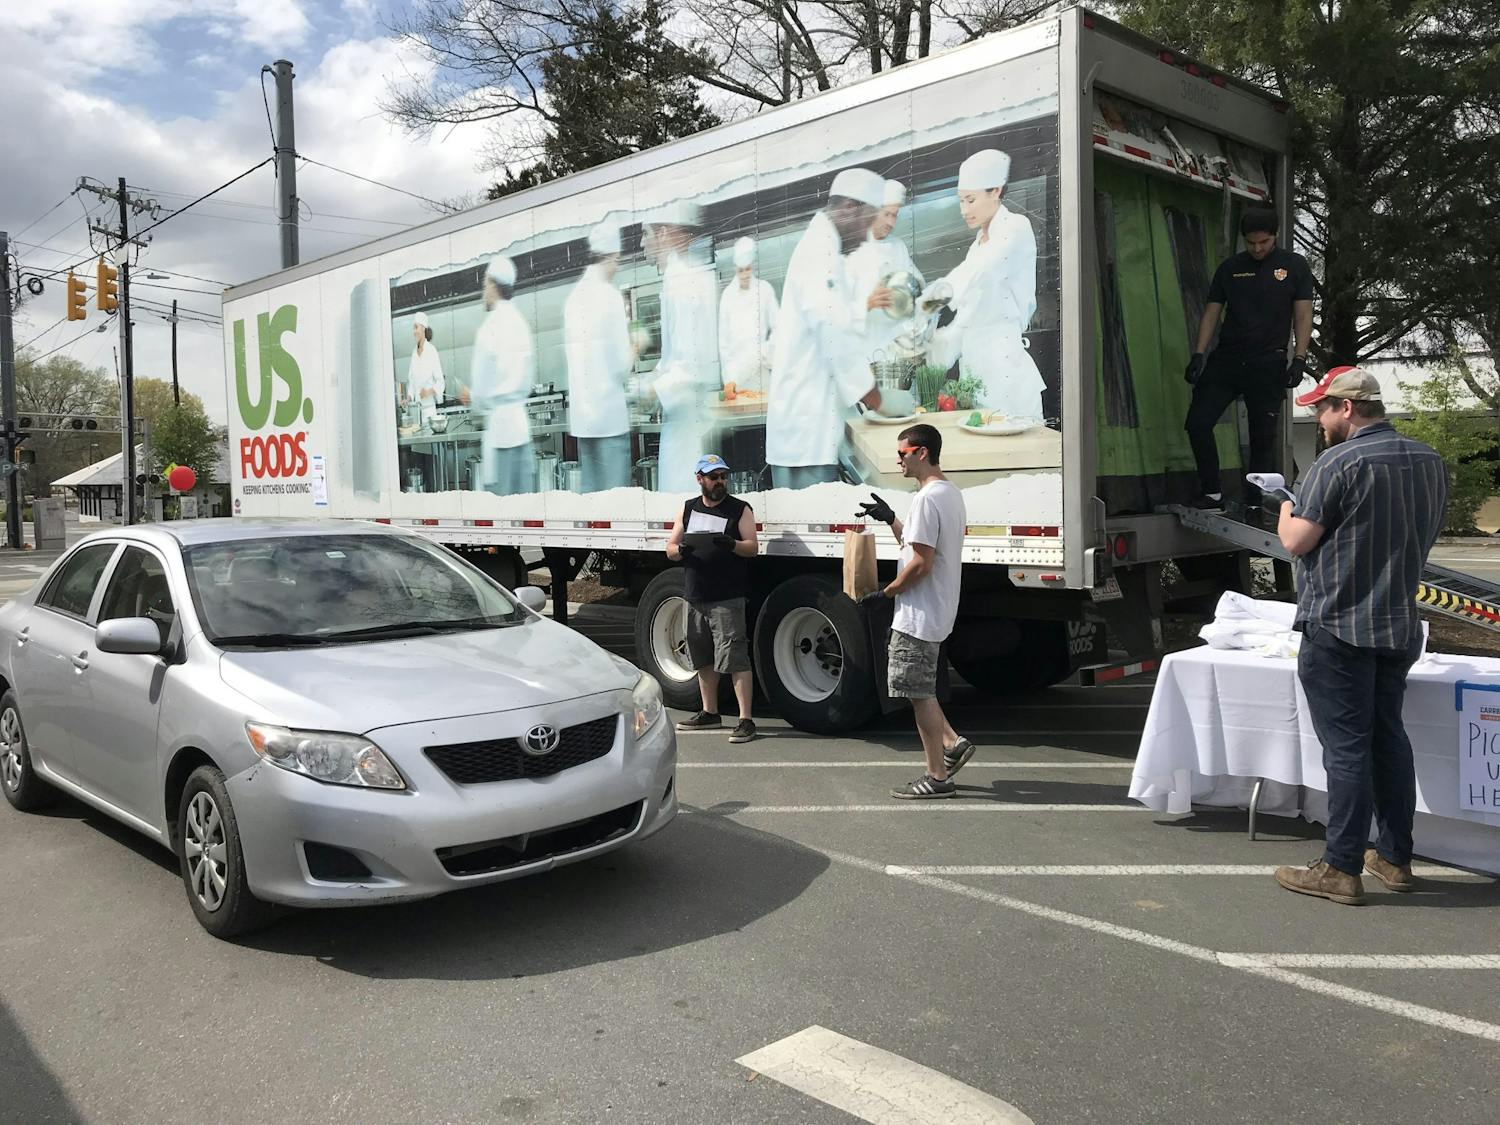 Carrboro United staff, who are all displaced service industry workers, safely deliver food directly to customers' cars on Hub Day at 300 E Main St. in the heart of downtown Carrboro. Photo courtesy of Zoë Dehmer.